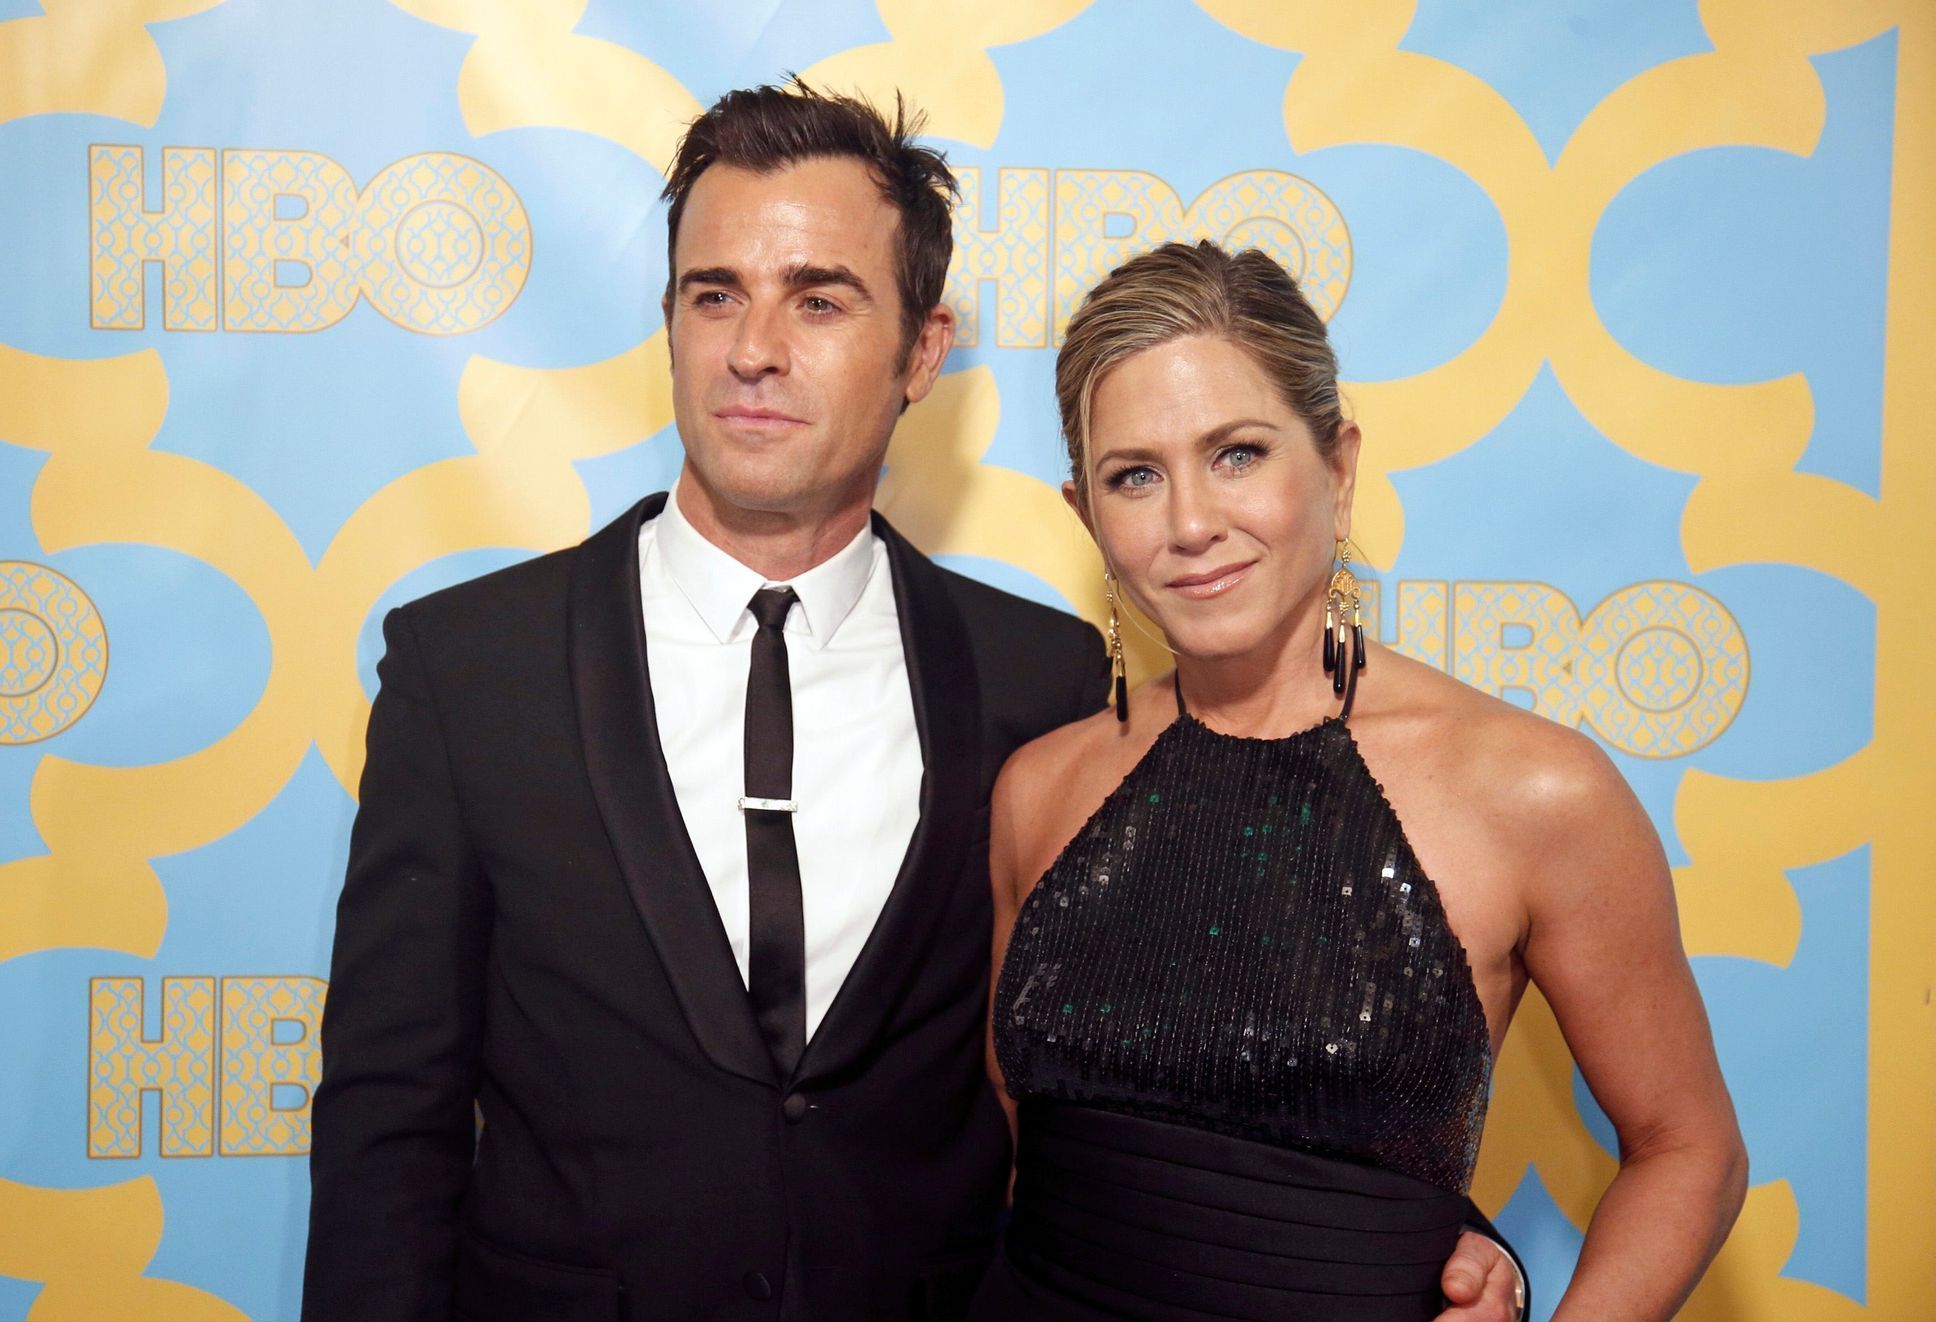 Actors Jennifer Aniston and Justin Theroux pose at the HBO after-party after the 72nd annual Golden Globe Awards in Beverly Hills